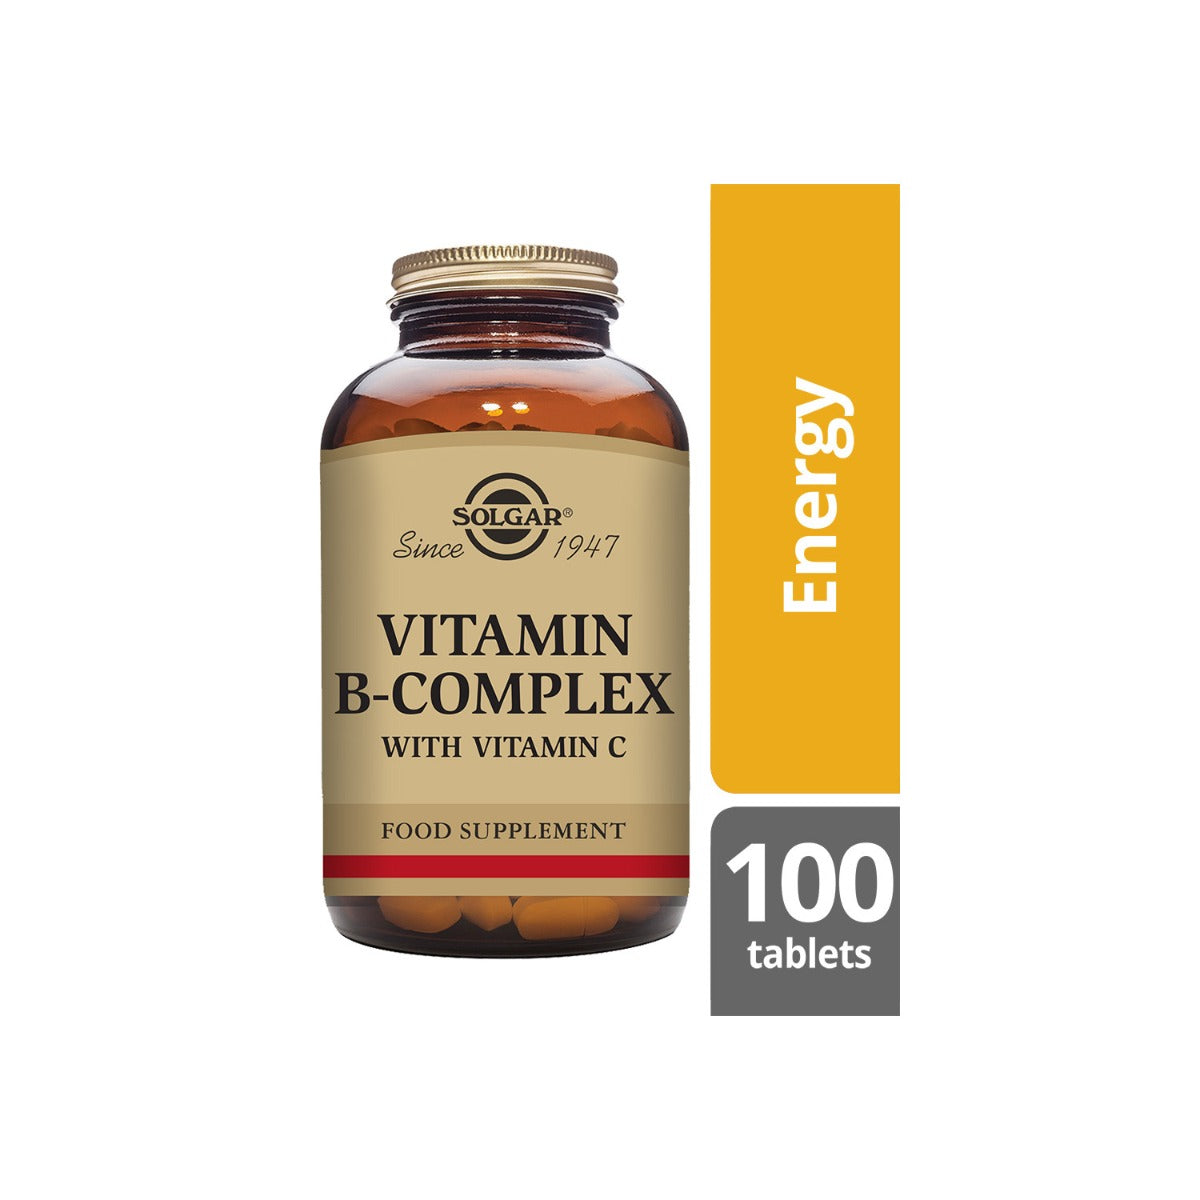 Solgar® Vitamin B-Complex with Vitamin C Tablets - Pack of 100